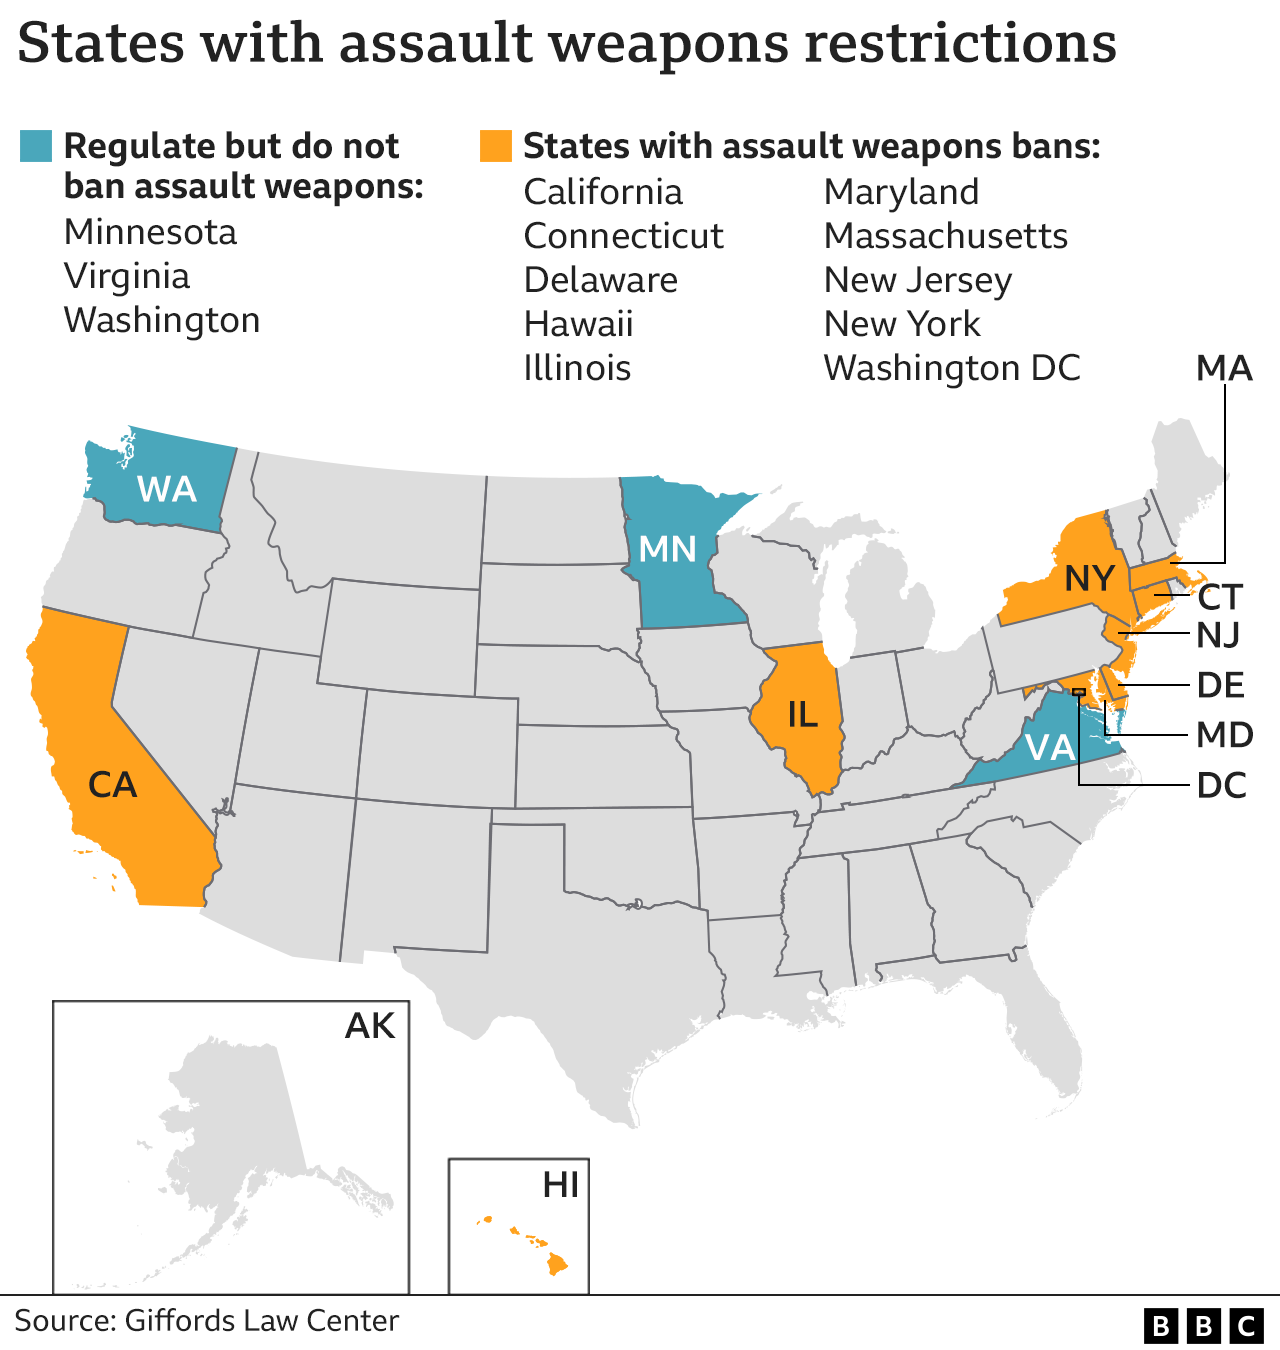 Map showing states with assault weapon bans - California, Connecticut, Delaware, Hawaii, Illinois, Maryland, Massachusetts, New Jersey, New York & Washington DC, and those with restrictions Minnesota, Virginia and Washington, March 2023